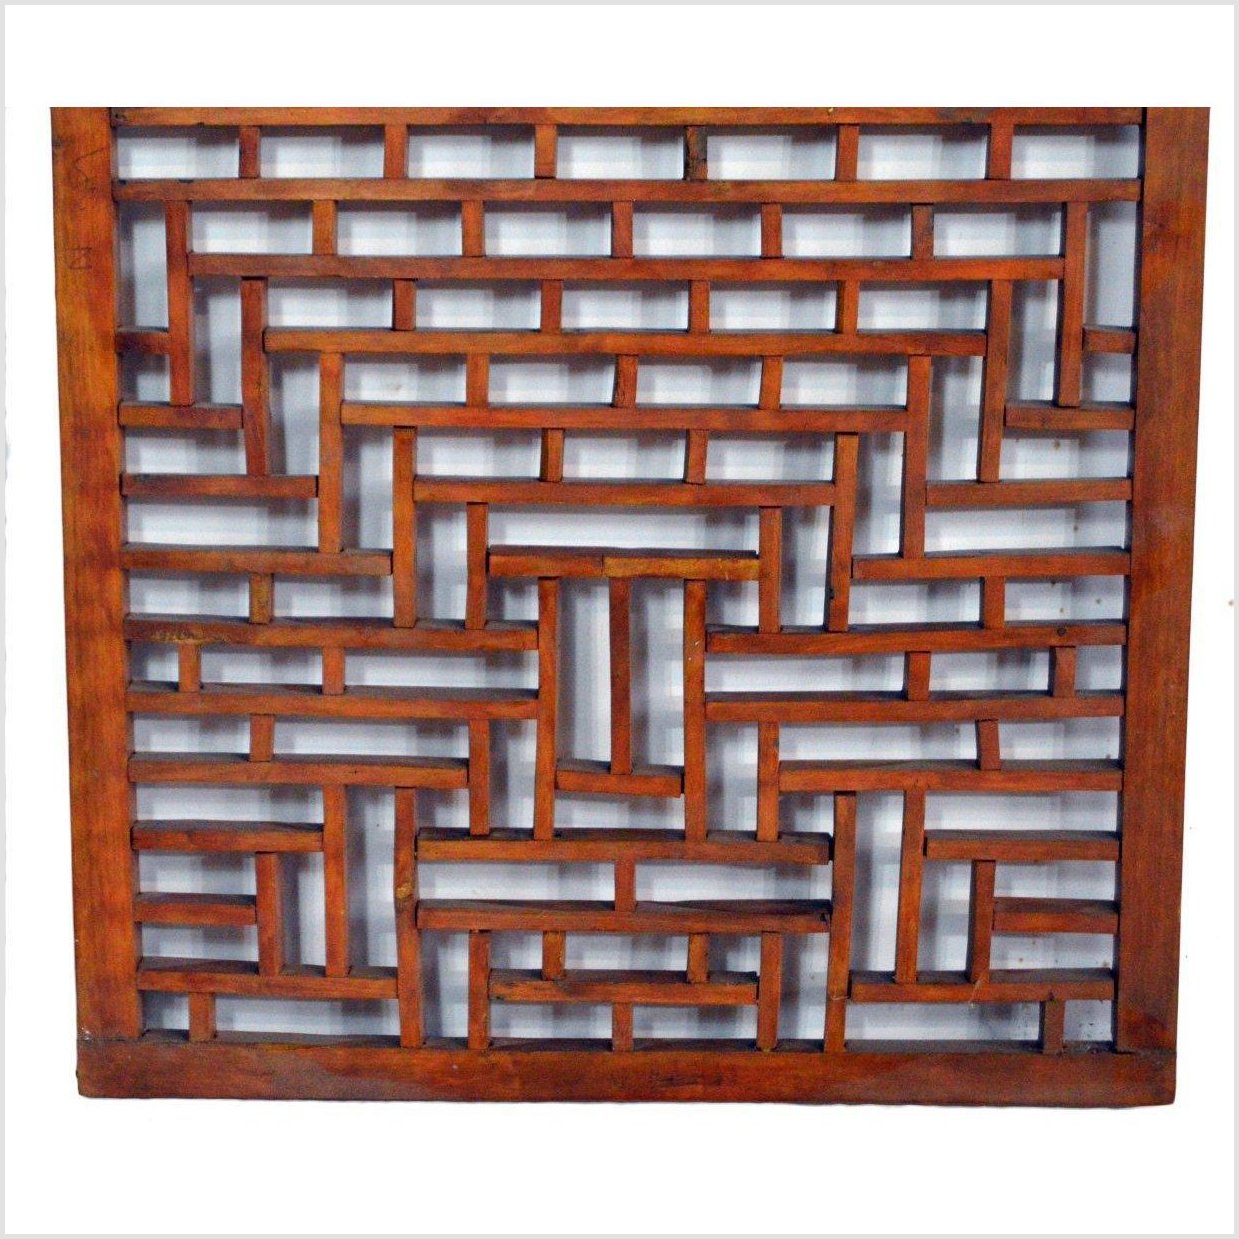 Wooden Wall Panel with Fretwork-YN2929-3. Asian & Chinese Furniture, Art, Antiques, Vintage Home Décor for sale at FEA Home